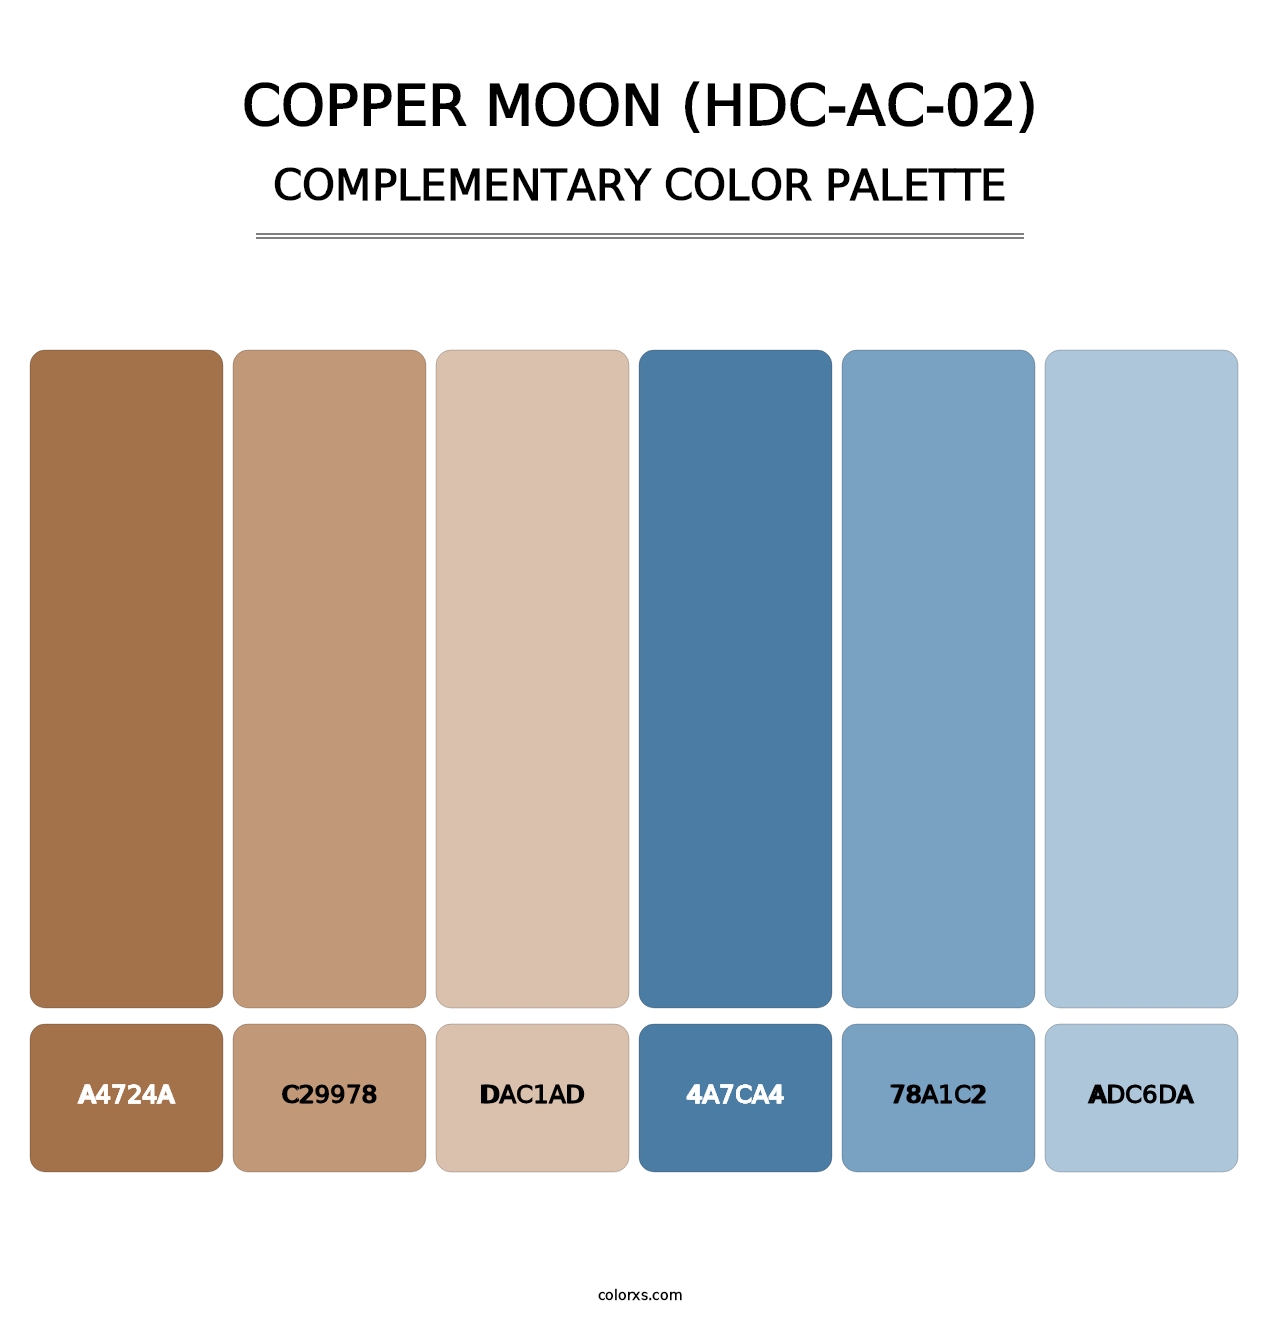 Copper Moon (HDC-AC-02) - Complementary Color Palette